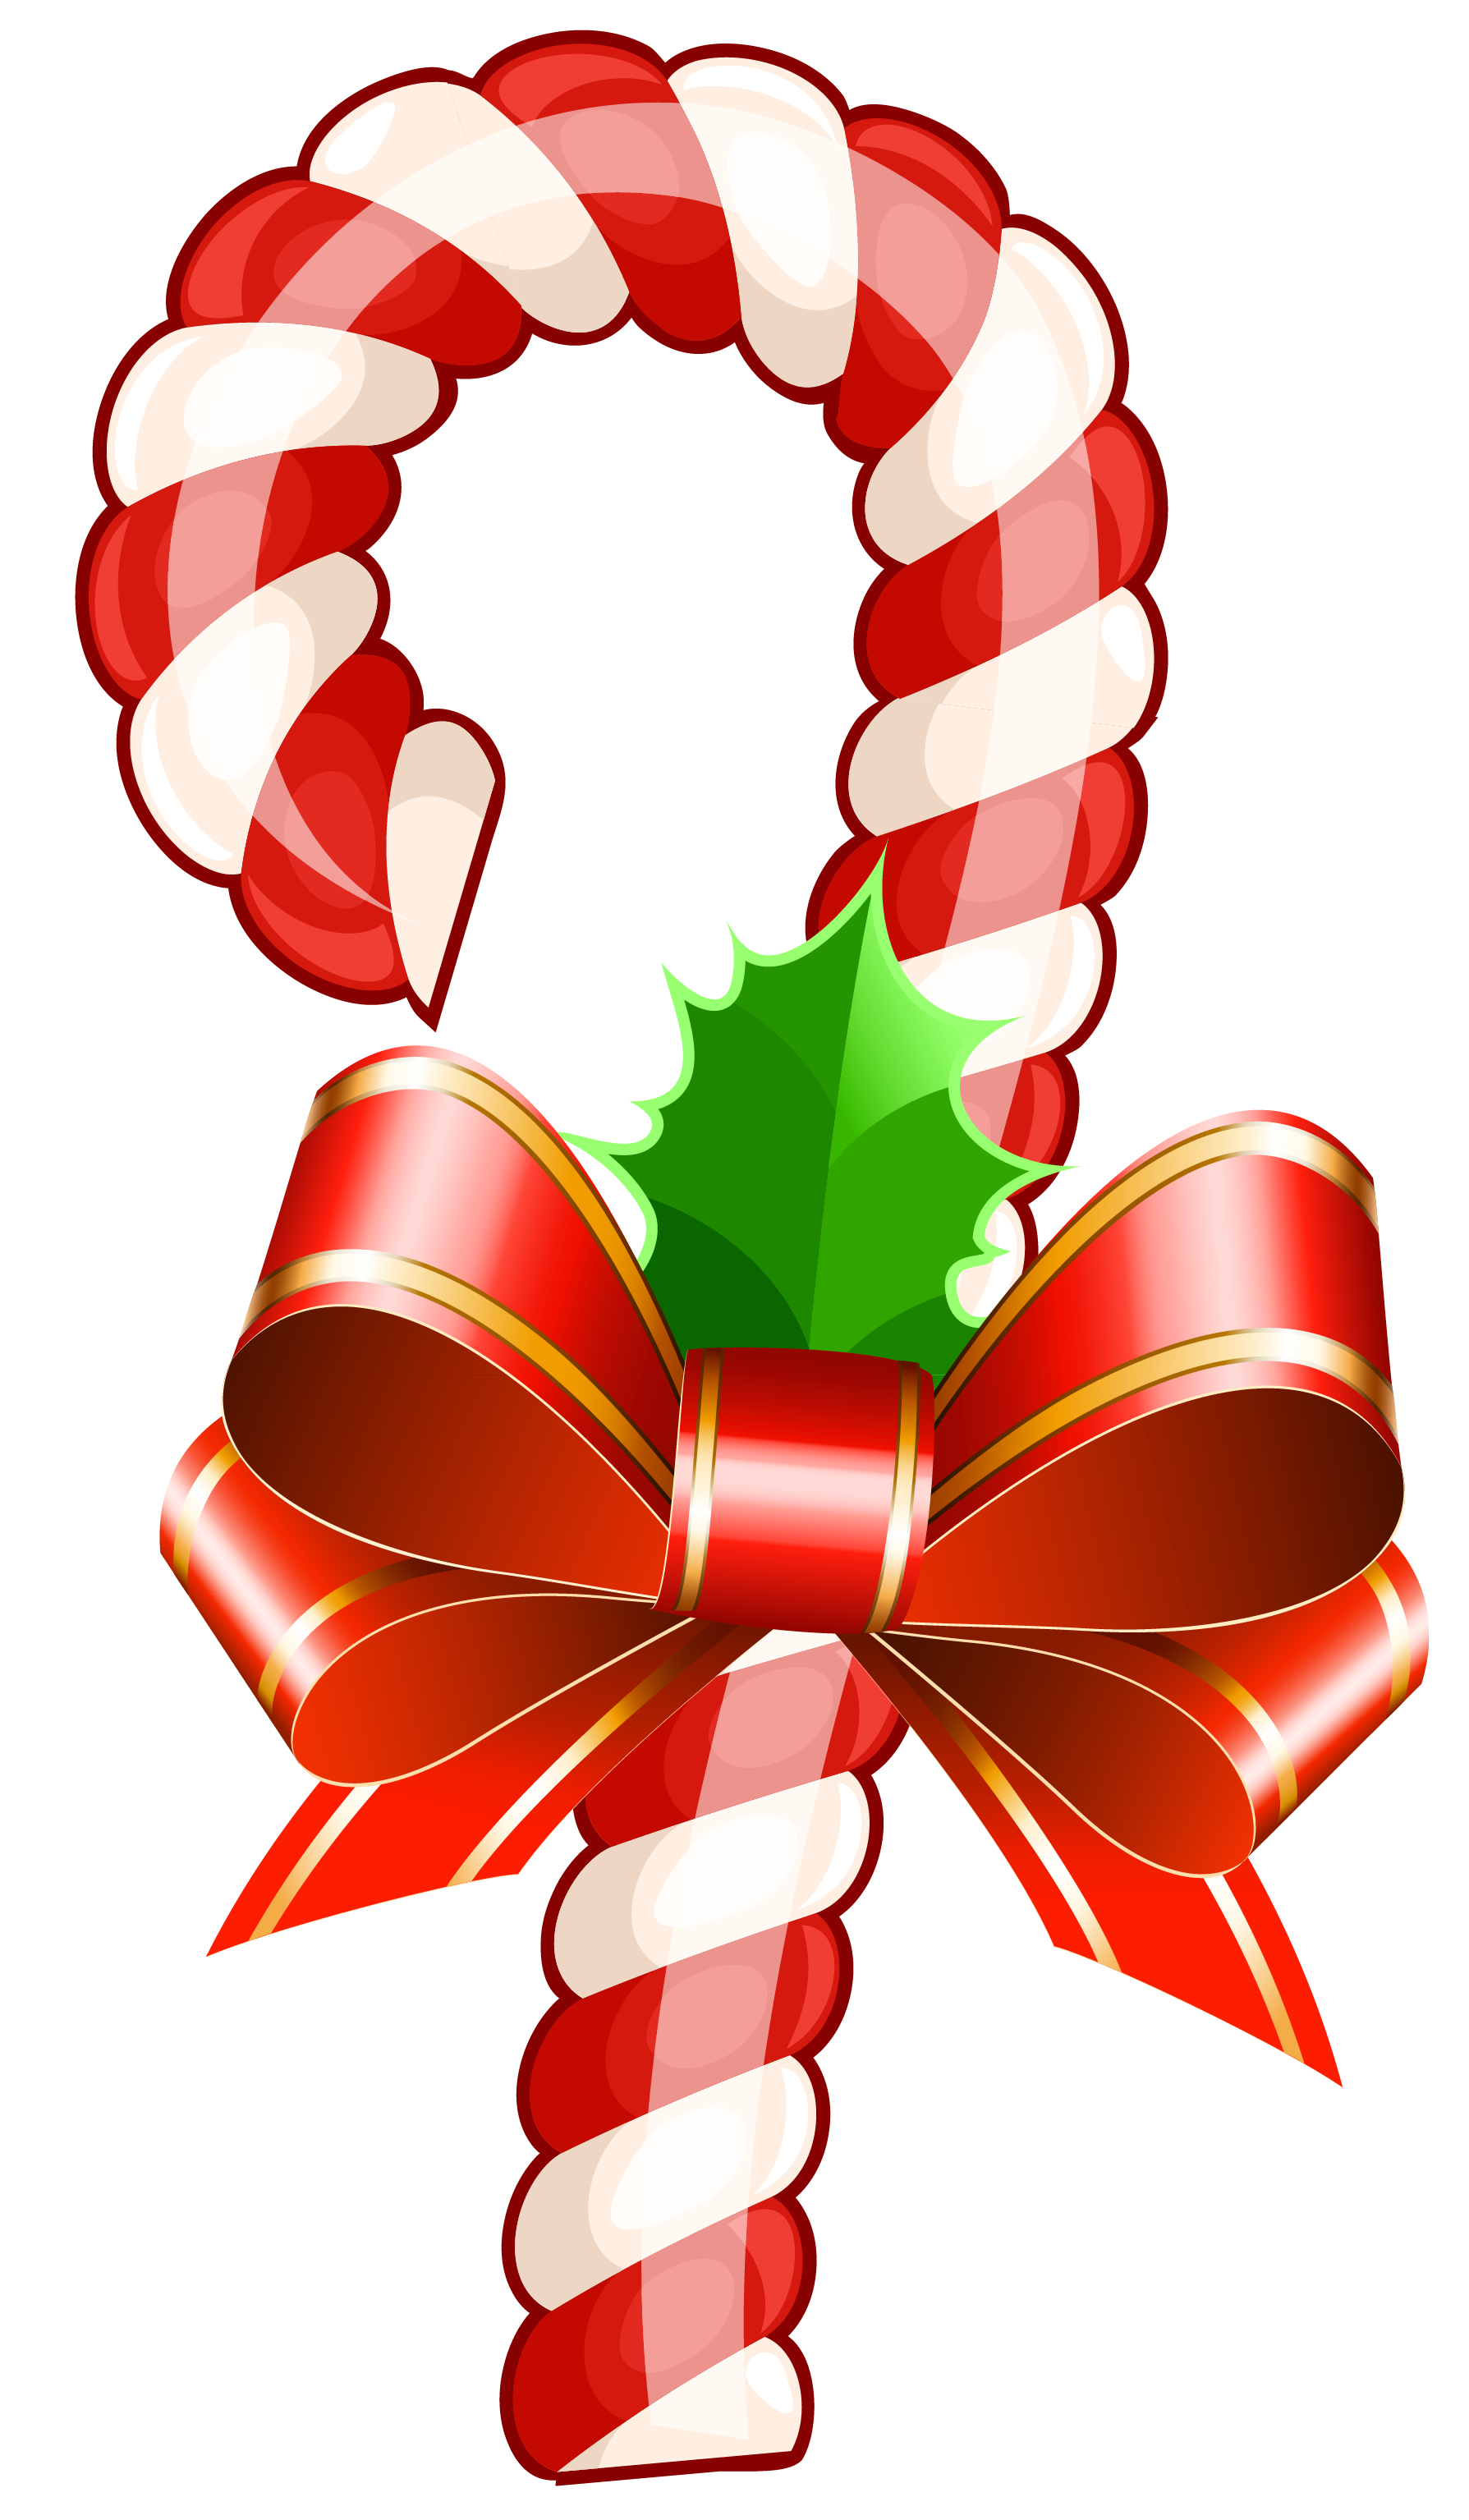 Morning clipart holiday. Large transparent christmas candy